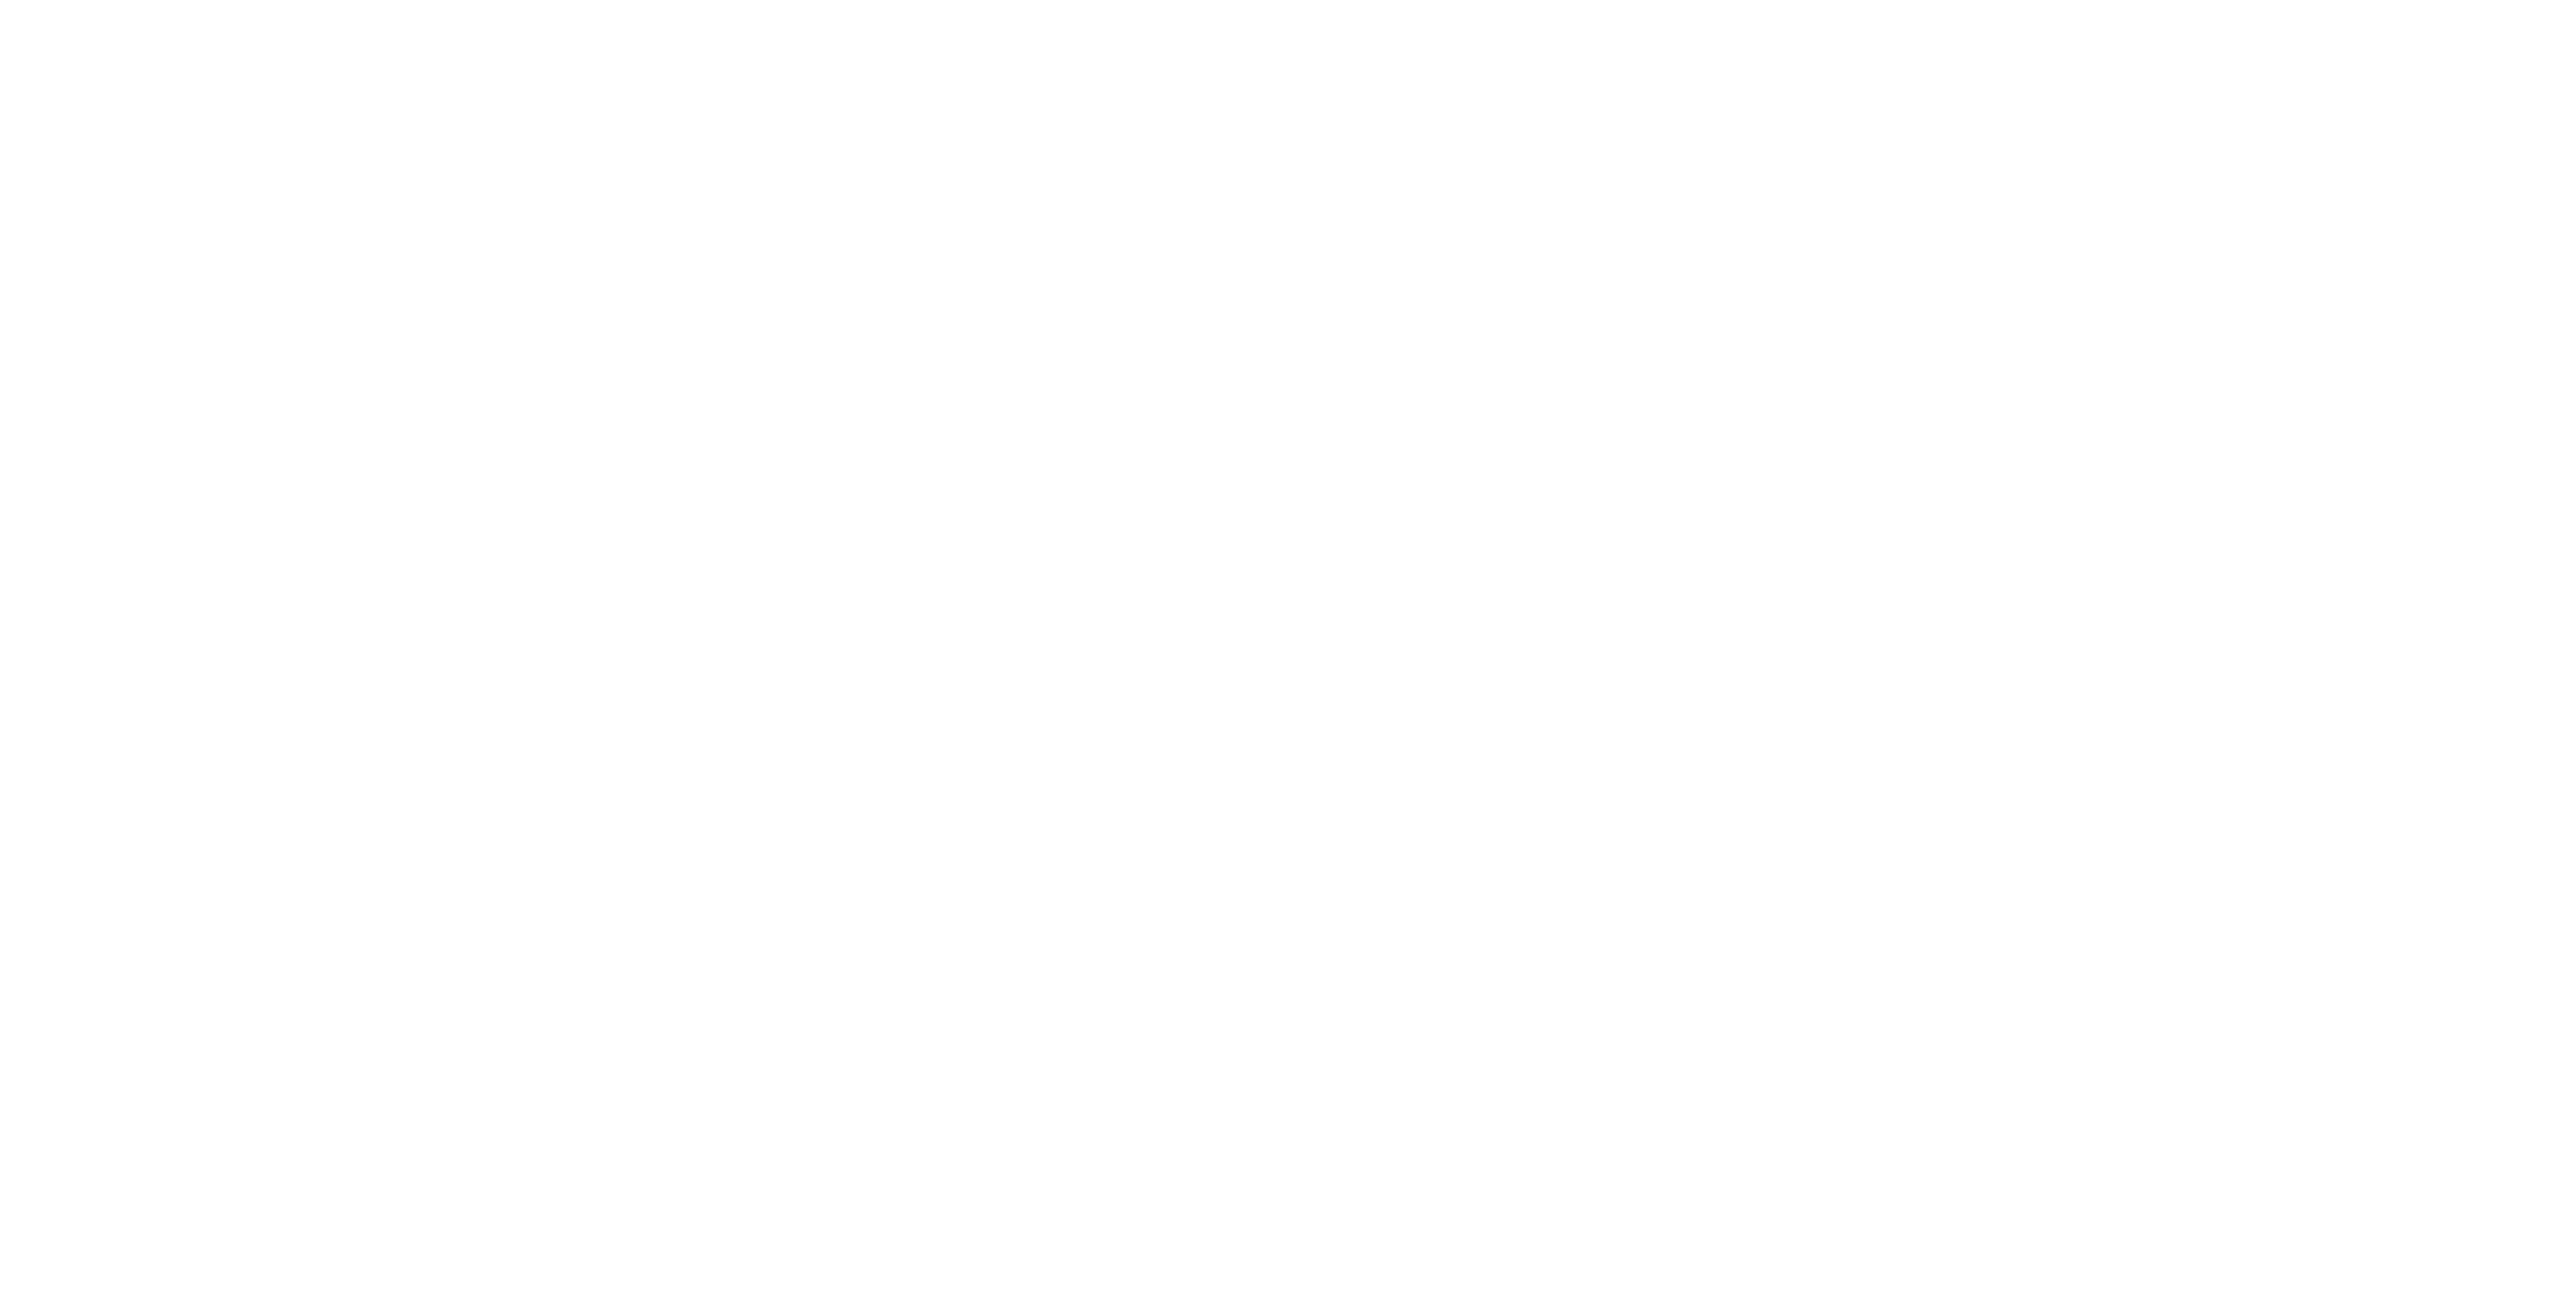 Derby Wine Estates Scrolled light version of the logo (Link to homepage)